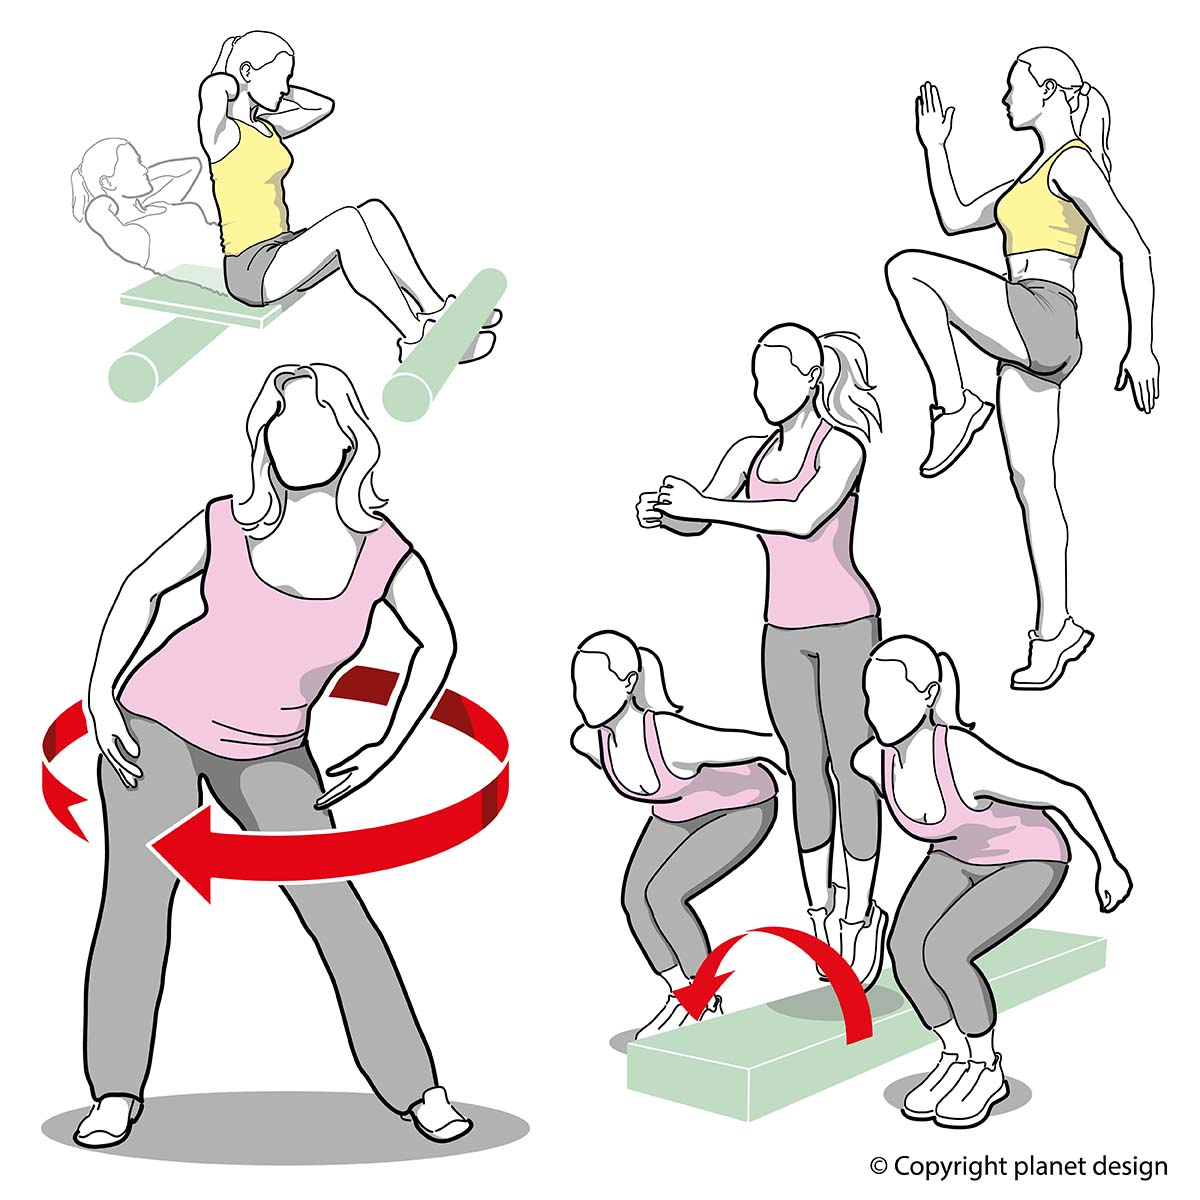 Exercise illustrations, graphic artist, graphic illustration, workout drawings